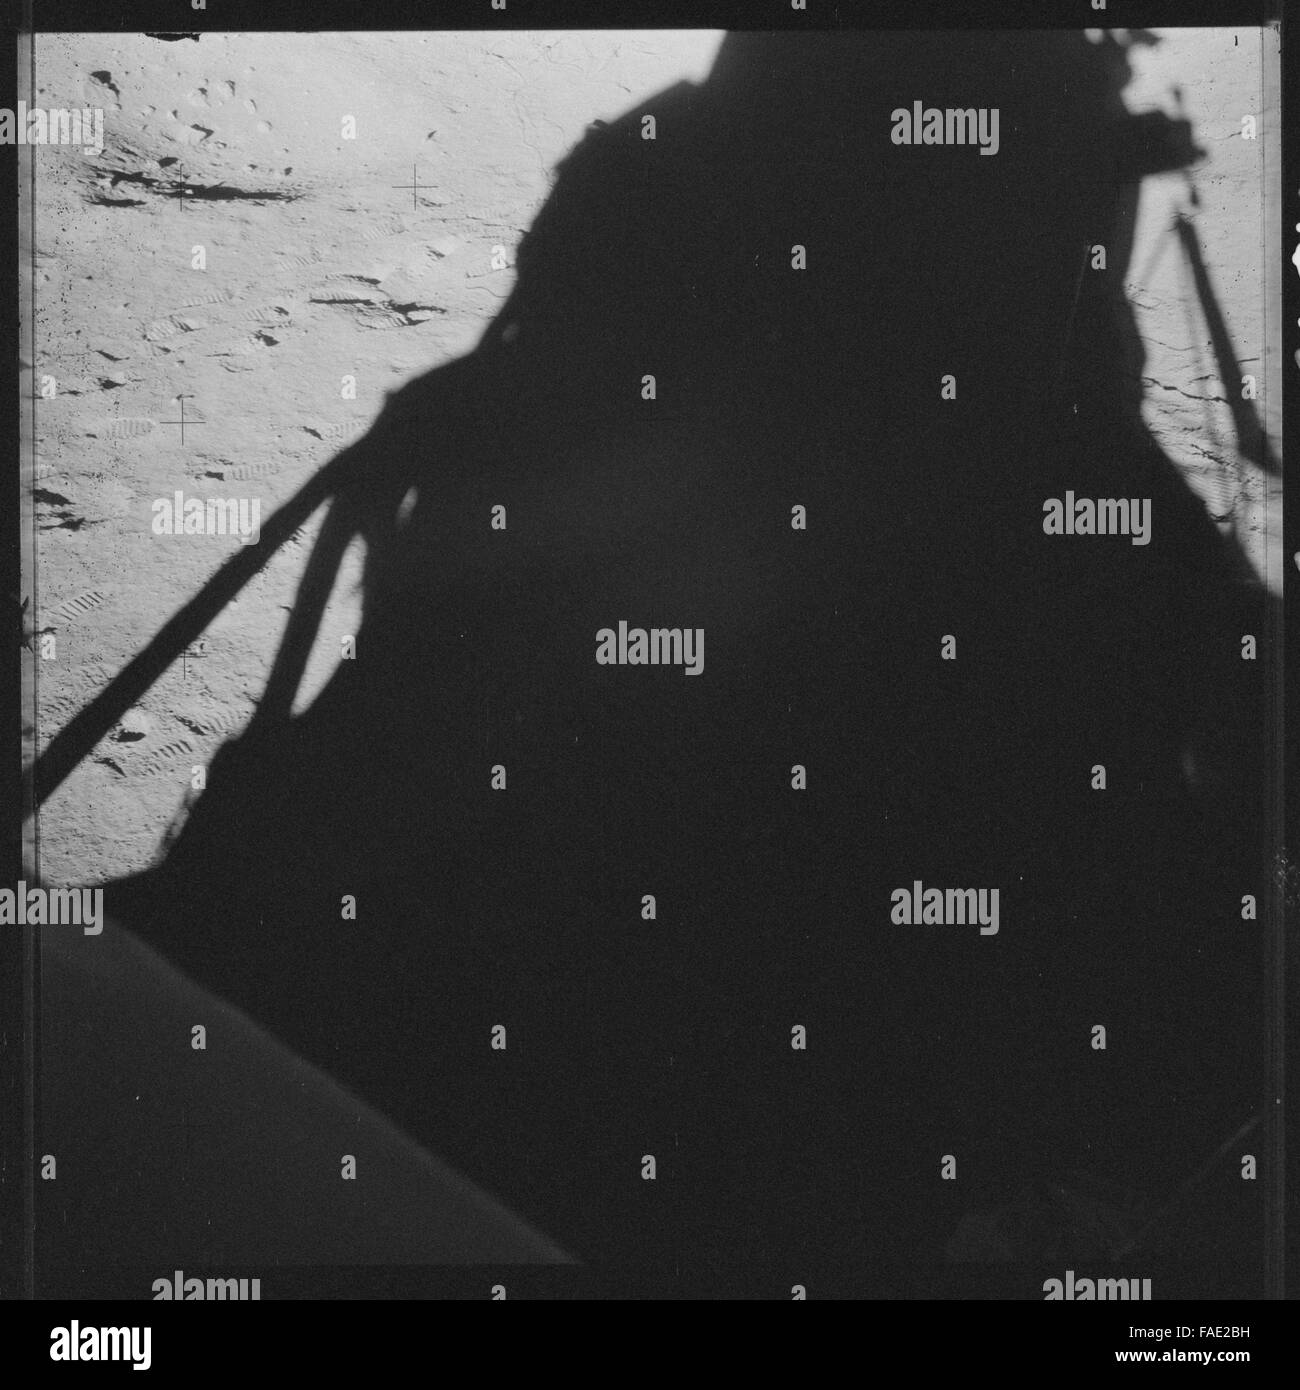 Apollo 12 untouched photographic archive, this is the complete unedited collection from the Apollo Mission Stock Photo